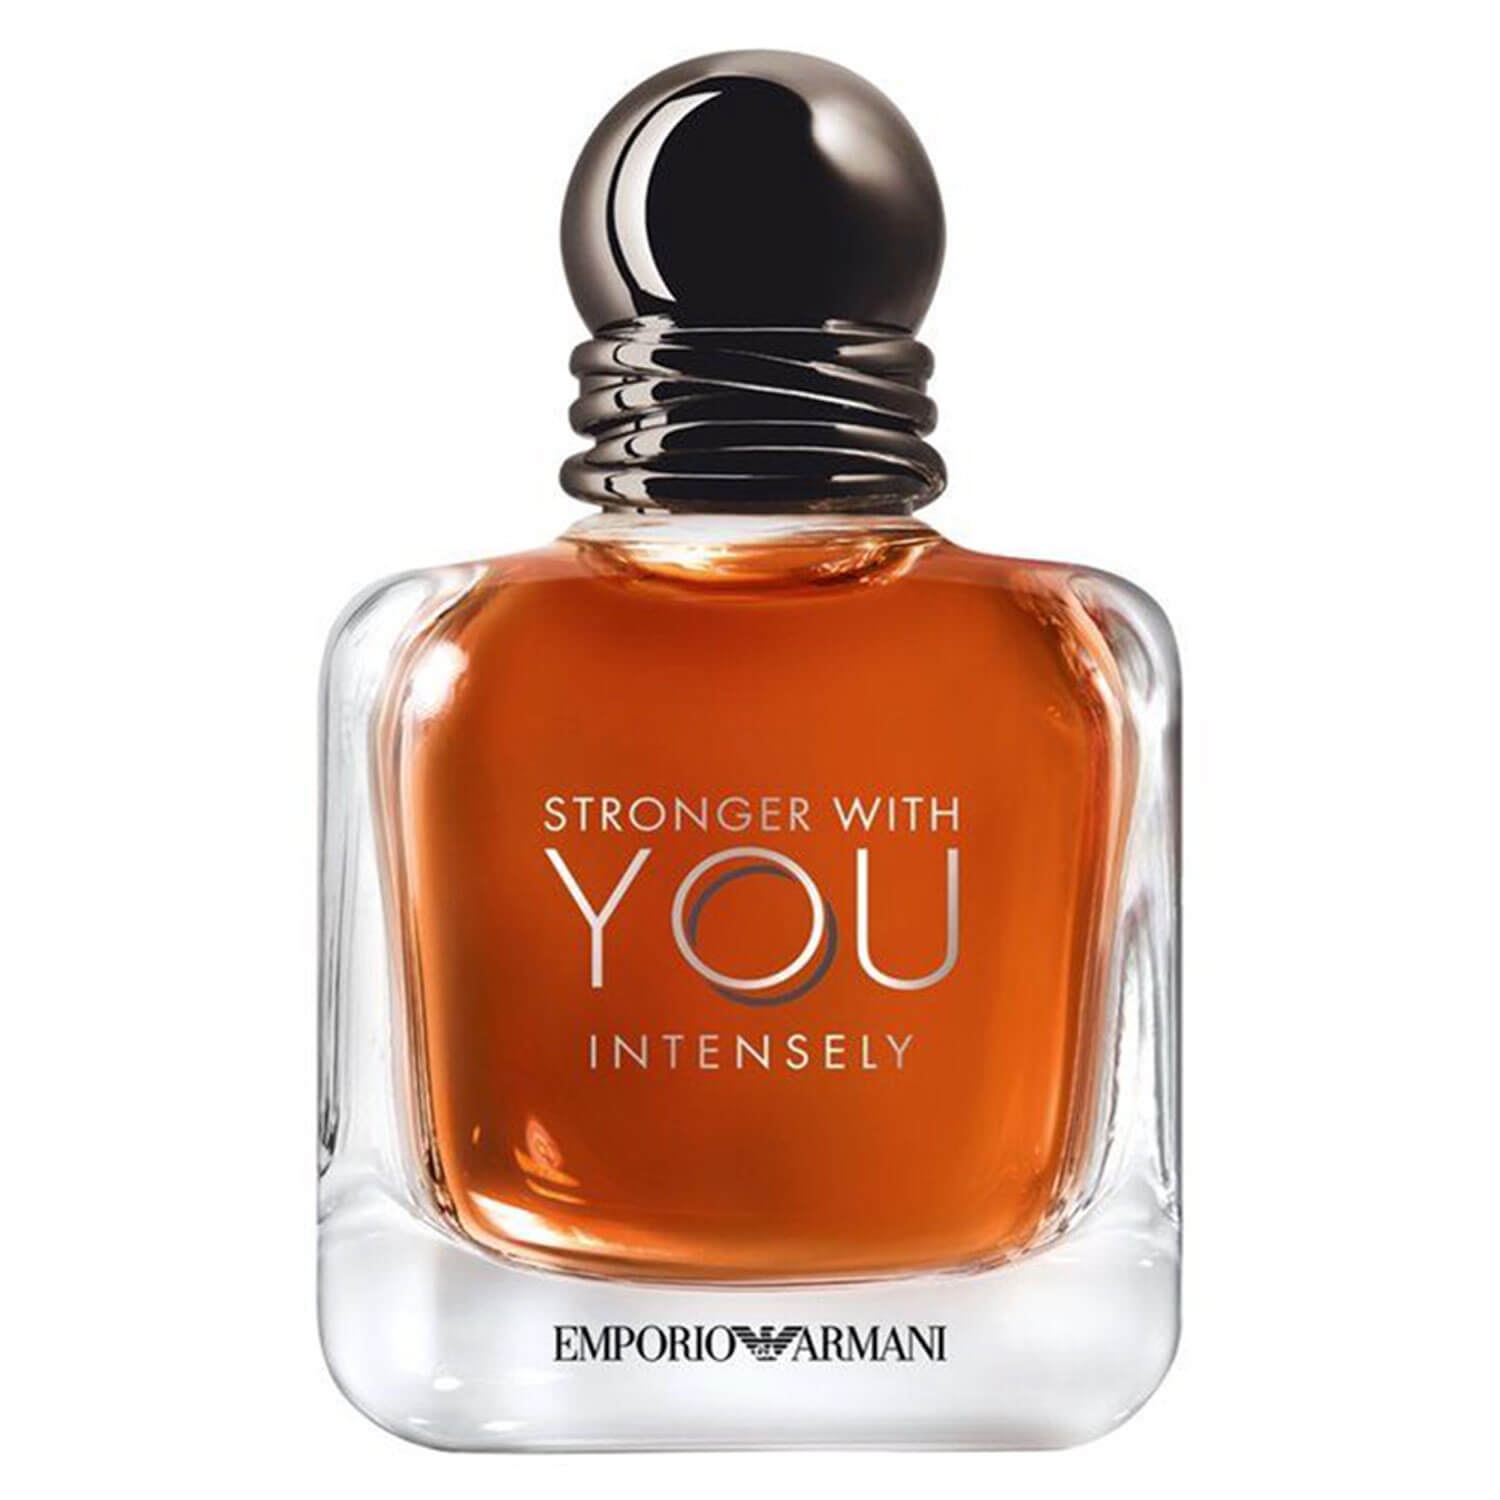 Product image from Emporio Armani - Stronger With You Intense Eau de Parfum